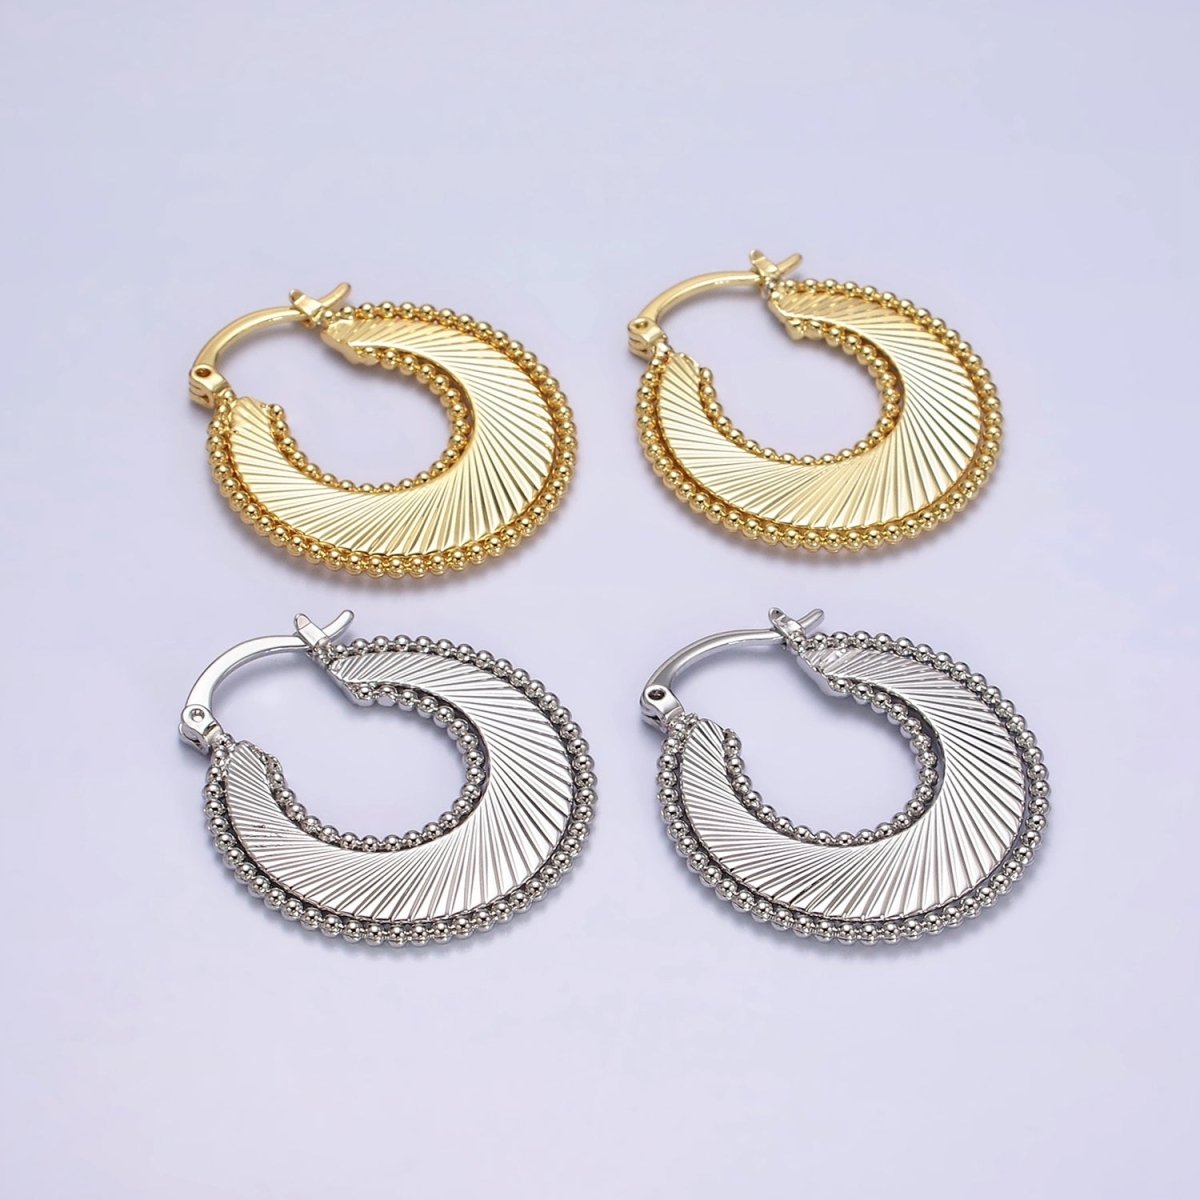 24K Gold Filled 30mm Spiral Line Beaded Bubble French Lock Latch Hoop Earrings in Gold & Silver | AE-614 AE-615 - DLUXCA